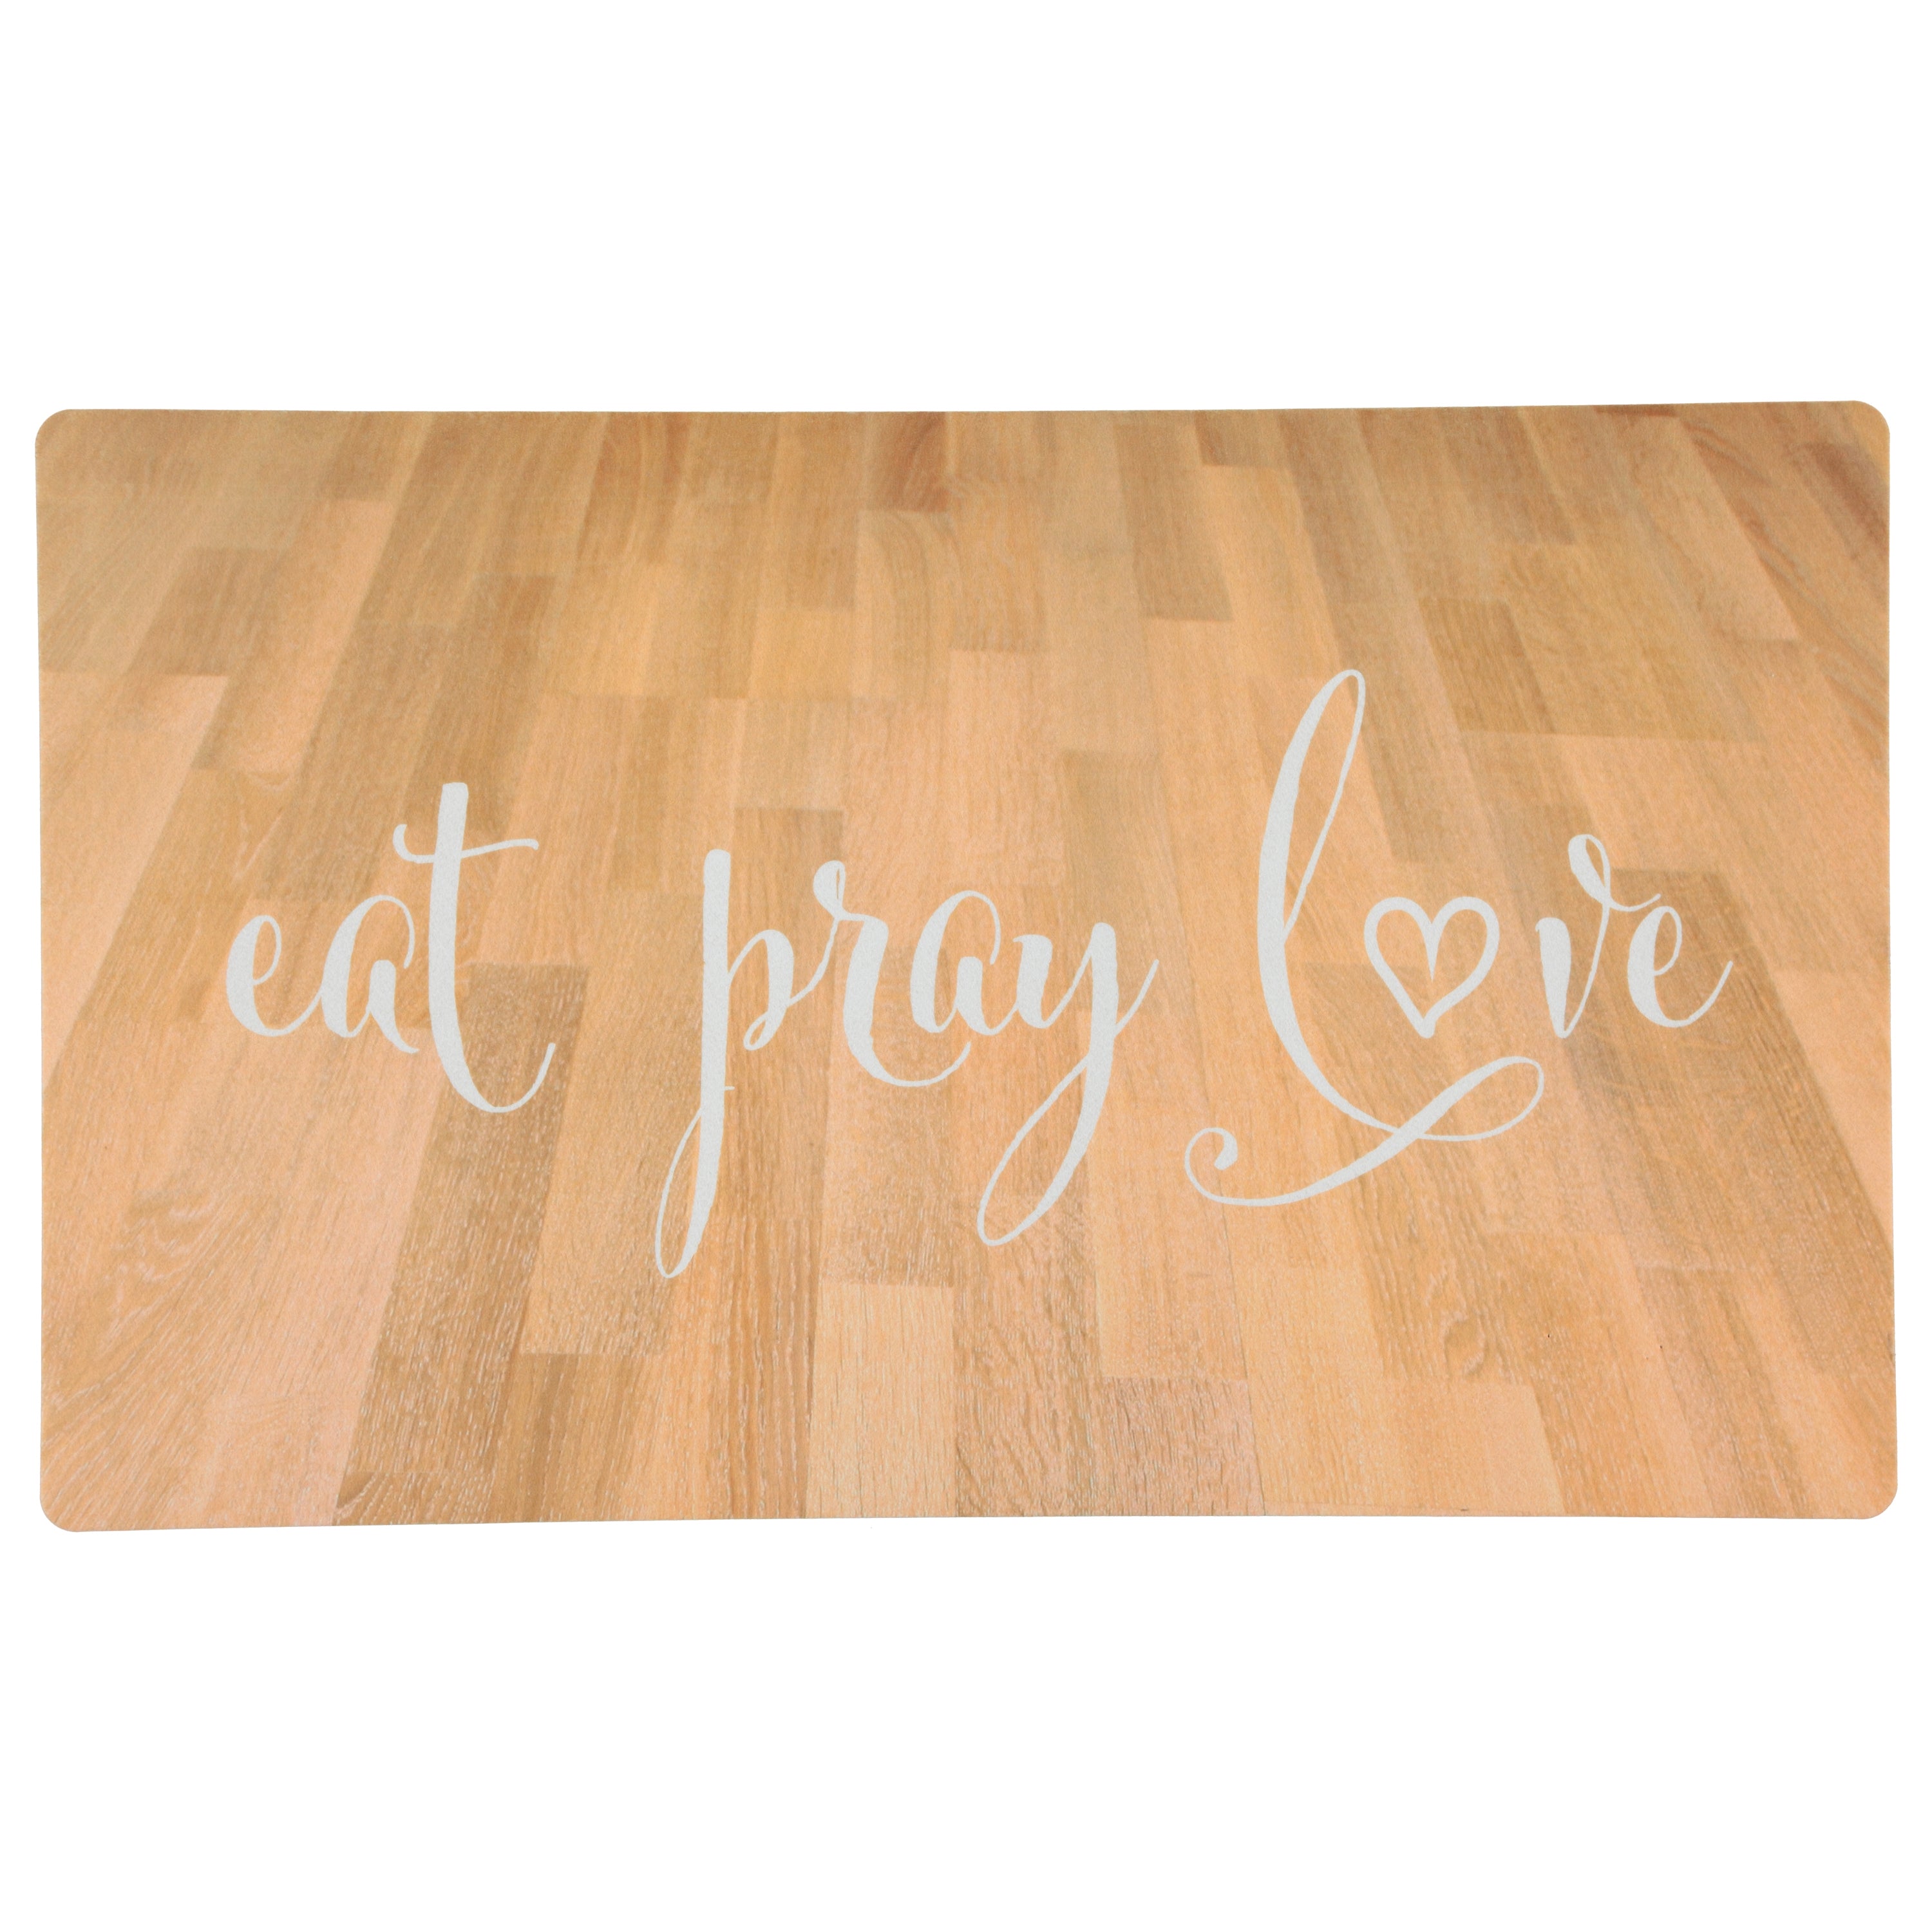 18" X 30" Eat Pray Love Kitchen Floor Mats for in Front of Sink Kitchen Rugs and Mats Non-Skid Polyester Kitchen Mat Standing Mat